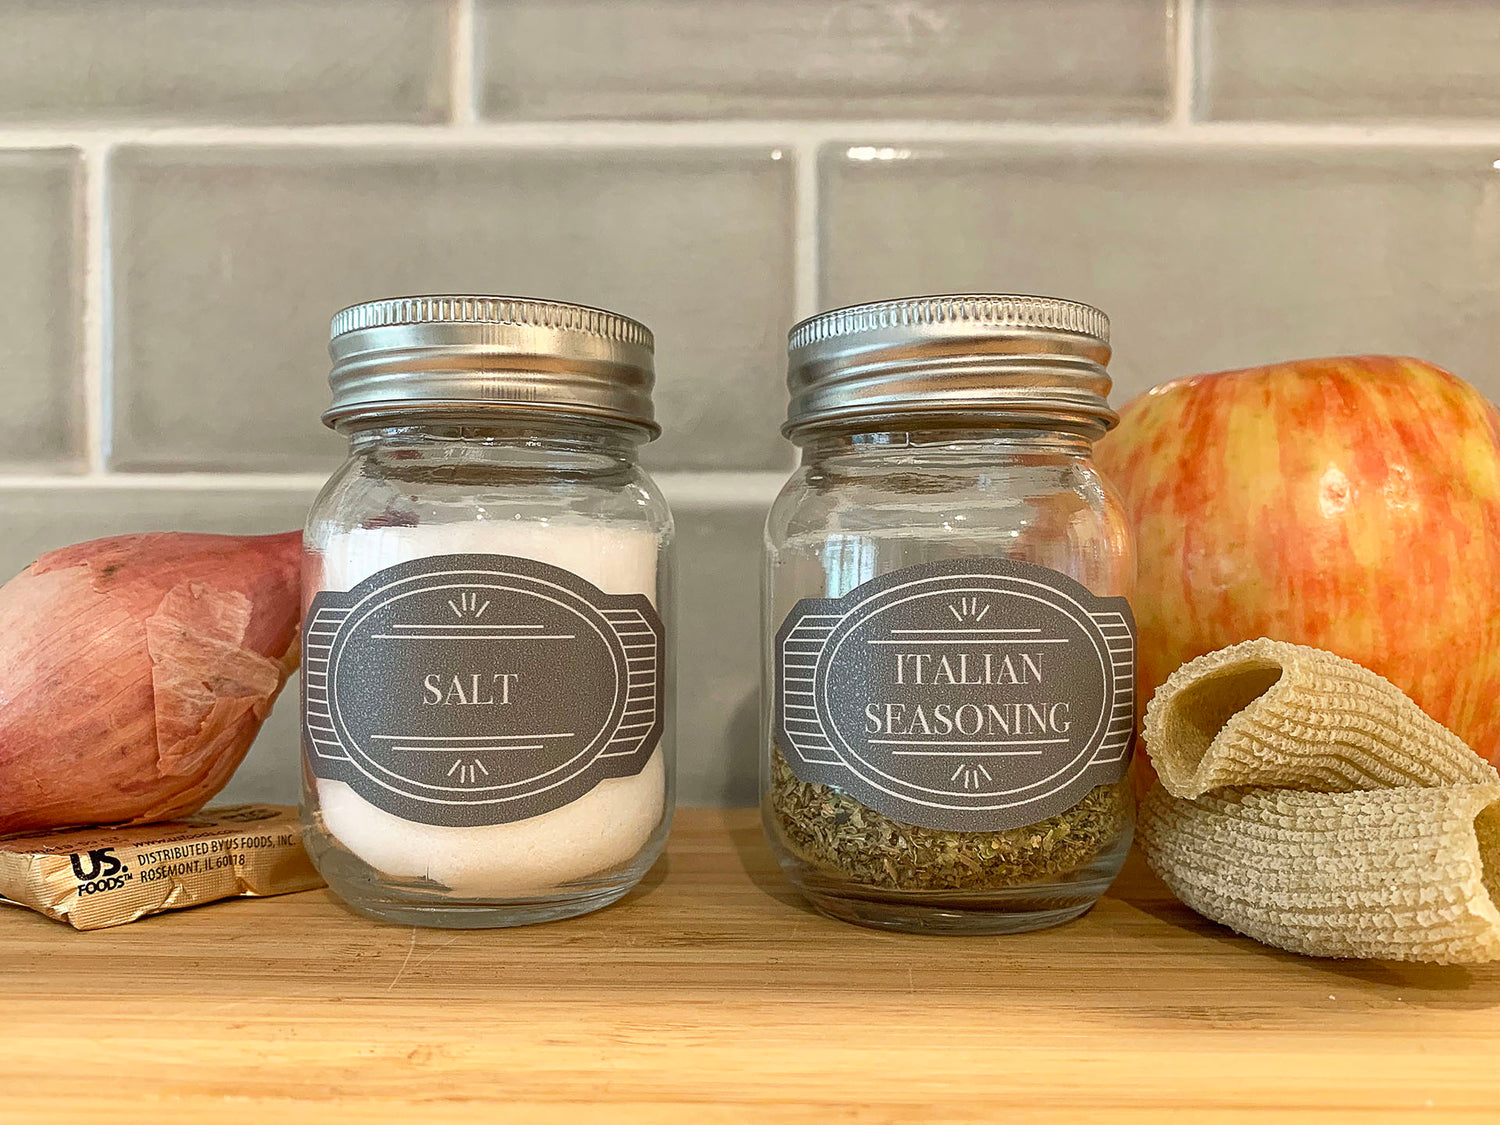 White vintage-style spice bottle vinyl decals in a kitchen: Classic and elegant labels on spice bottles, evoking a vintage aesthetic in the kitchen while ensuring easy identification of the various spices.